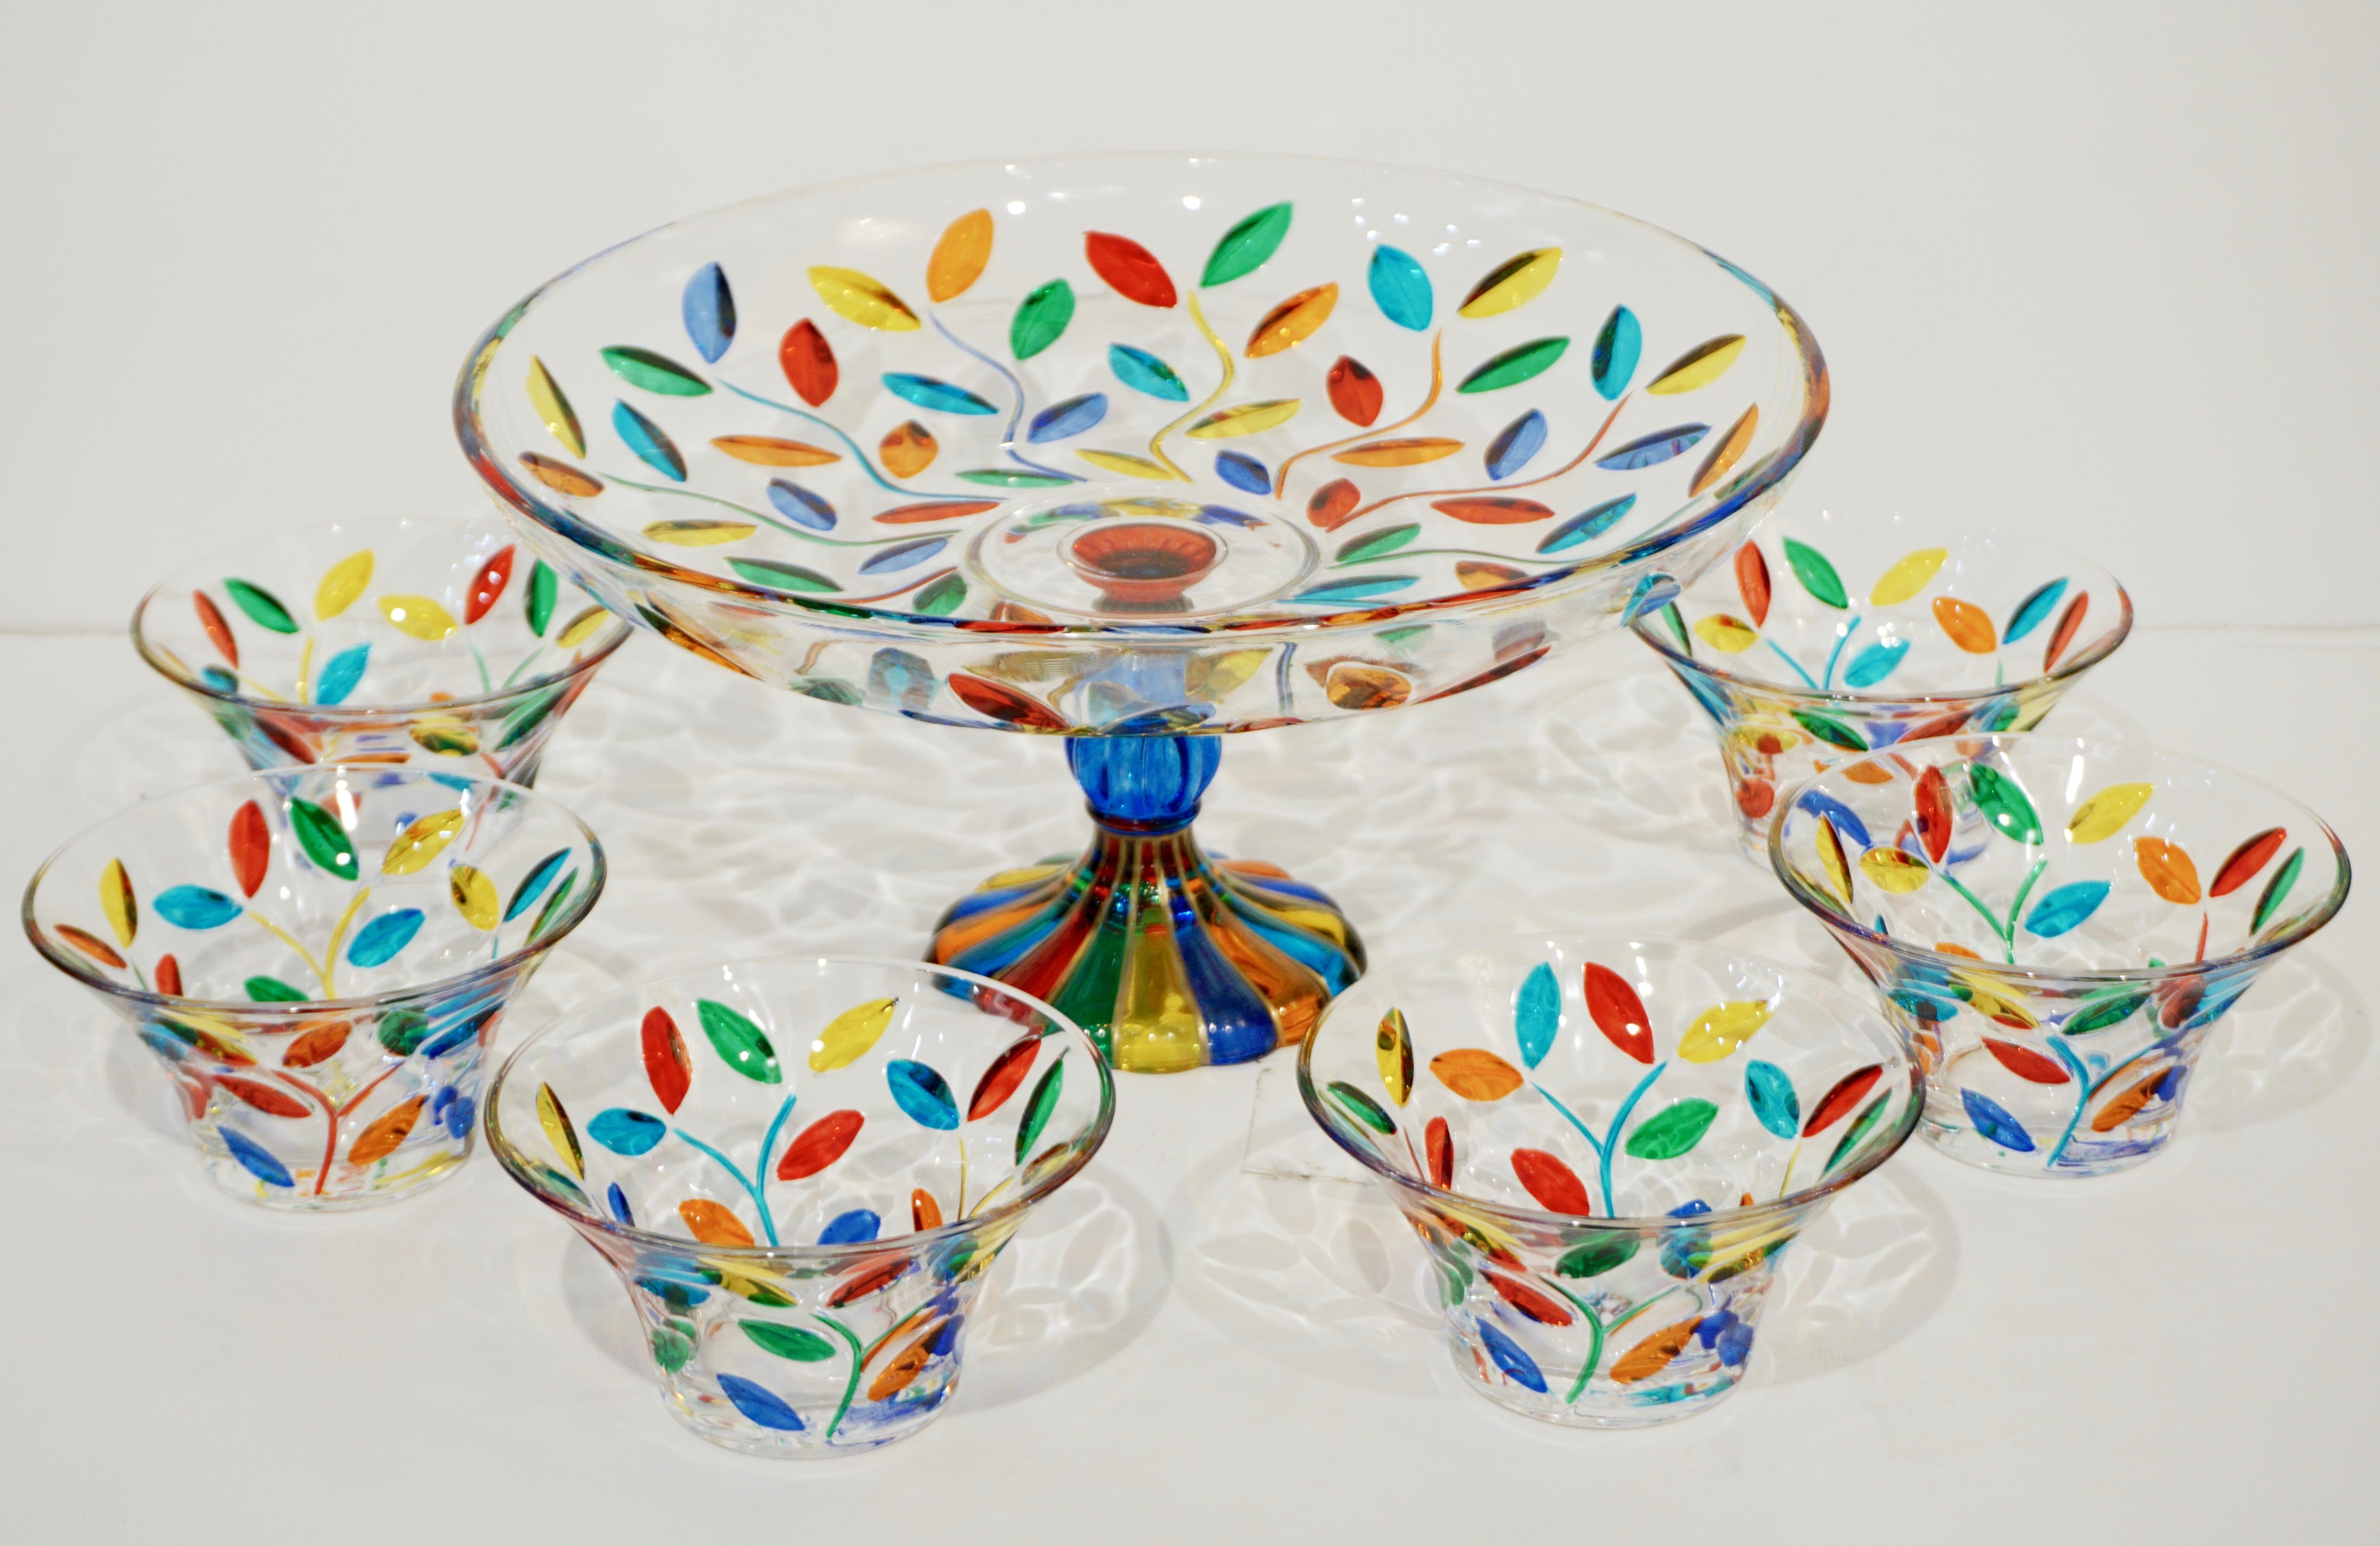 Colleoni Modern Crystal Murano Glass Compote Dish / Tazza with Colorful Leaves 5